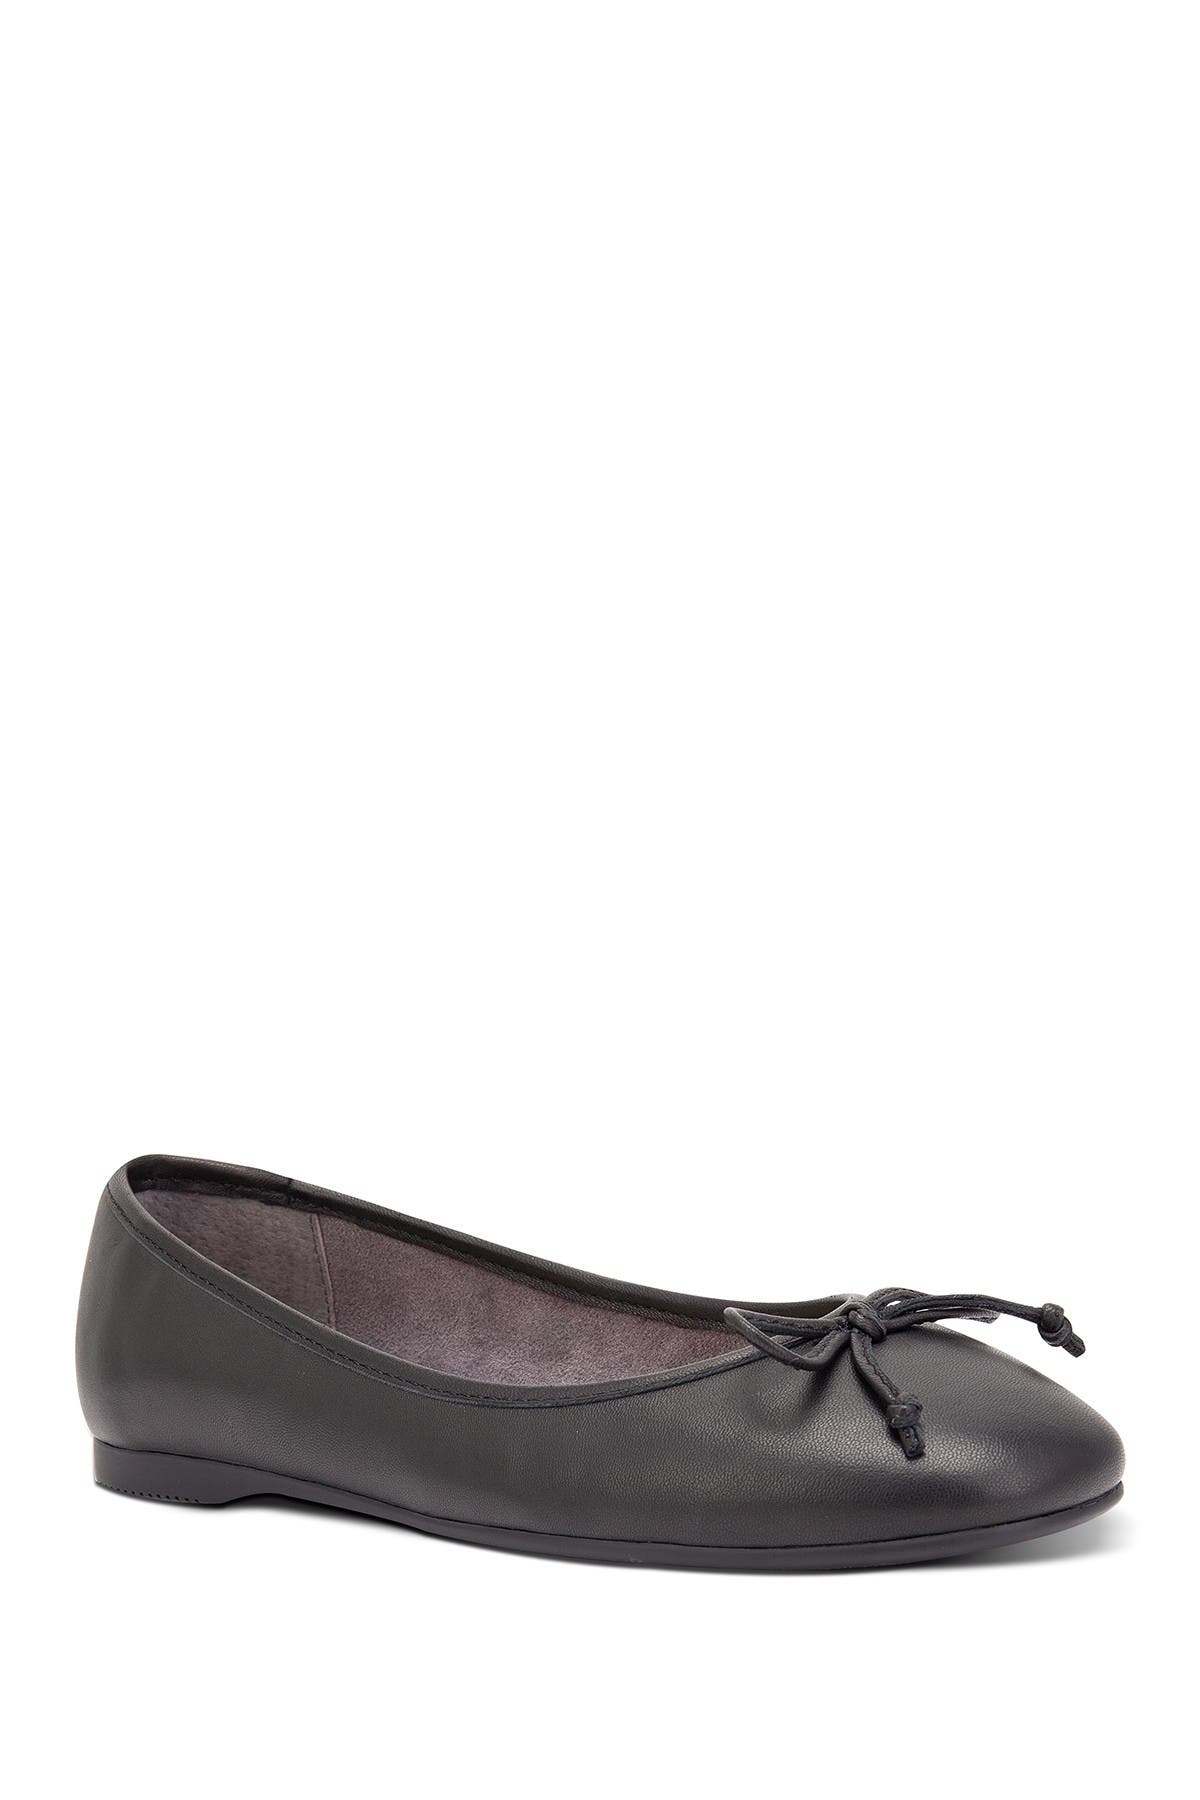 Me Too | Hilly Leather Ballet Flat 